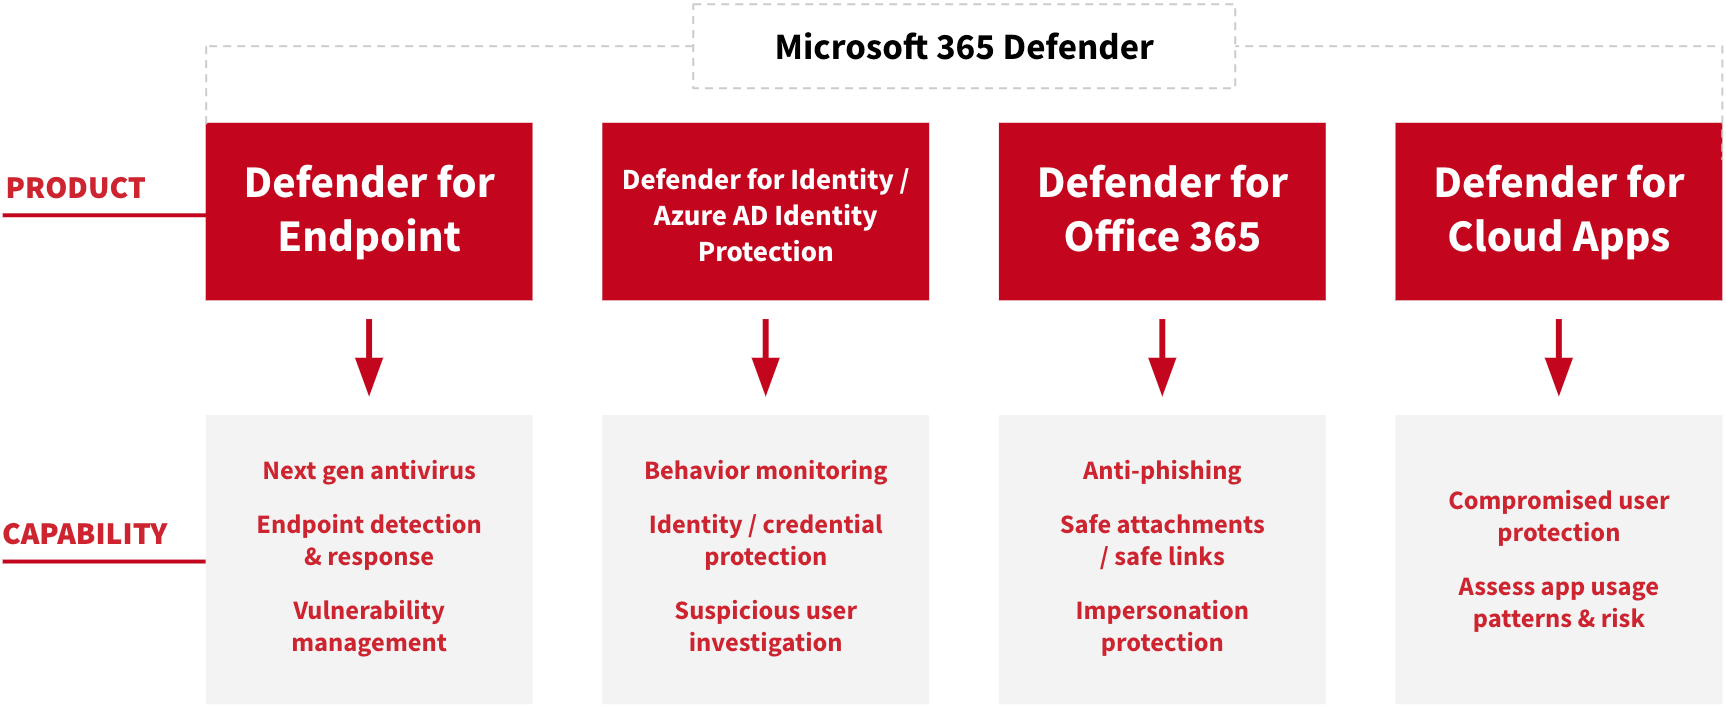 Graphic showing Microsoft 365 Defender, which includes Defender for Endpoint, Defender for Identity, Azure AD Identity Protection, Defender for Office 365 and Defender for Cloud Apps products, along with some of their core capabilities.